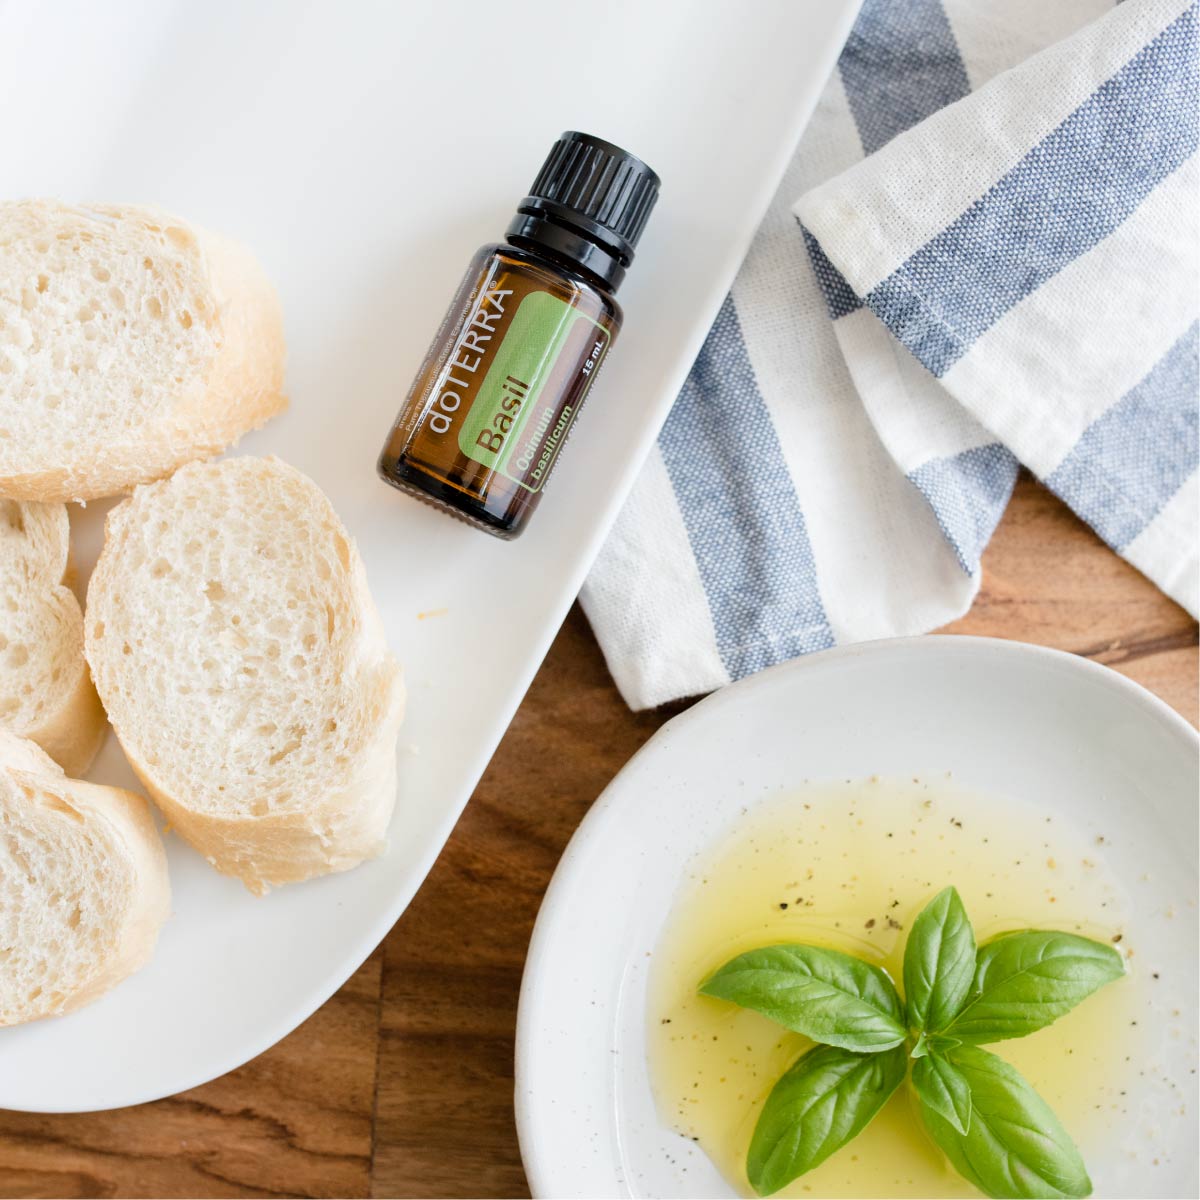 Wondering how to use Basil essential oil? Try diffusing Basil oil to promote focus, or adding Basil oil to your favorite Italian recipes.